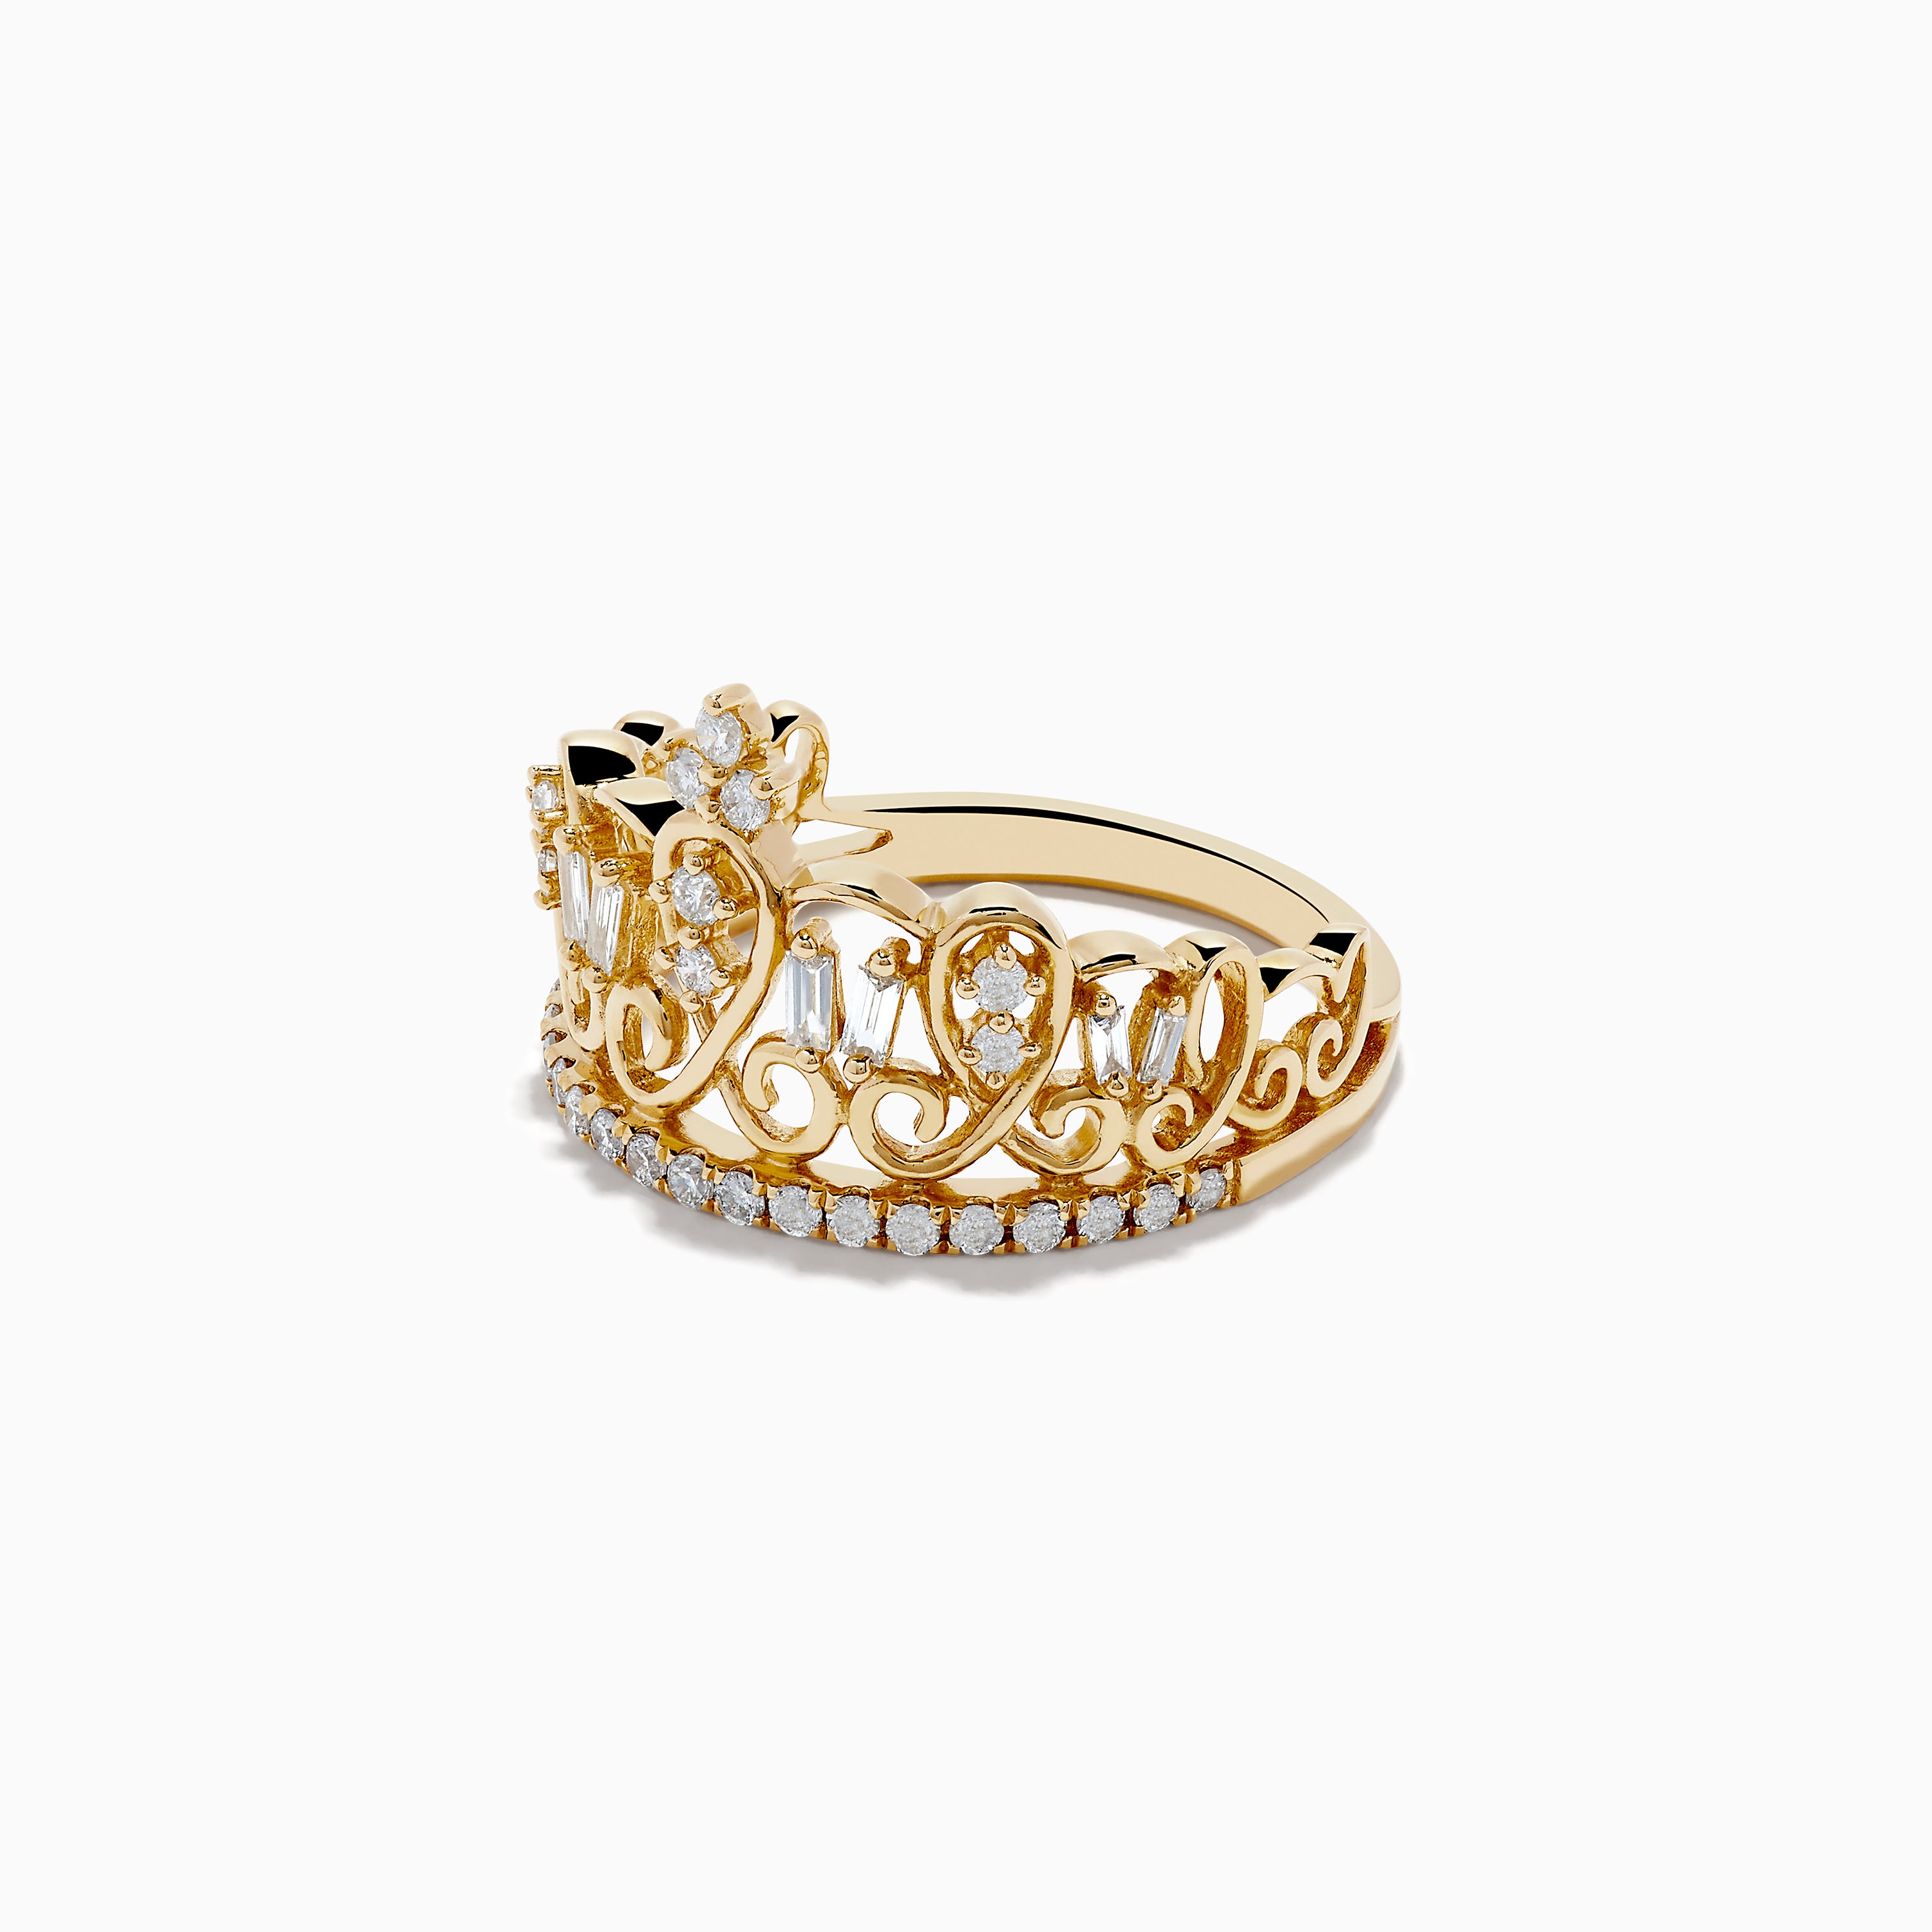 S925 Sterling Silver Queen's Crown Ring Yellow Gold Plated